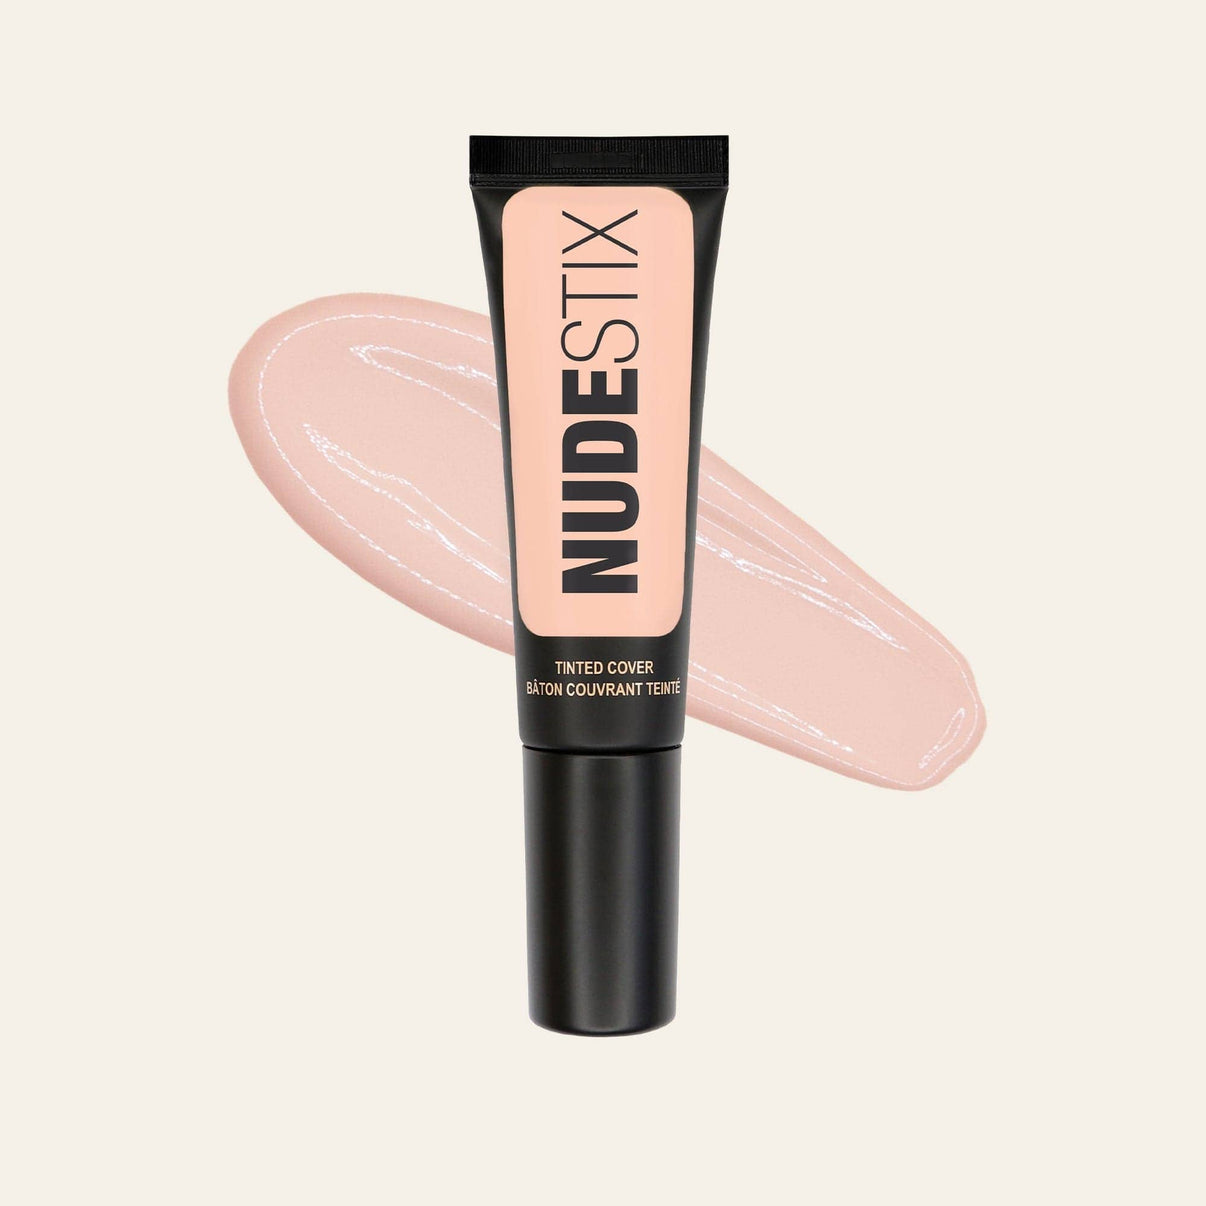 Tinted Cover Liquid Foundation Nude 1.5